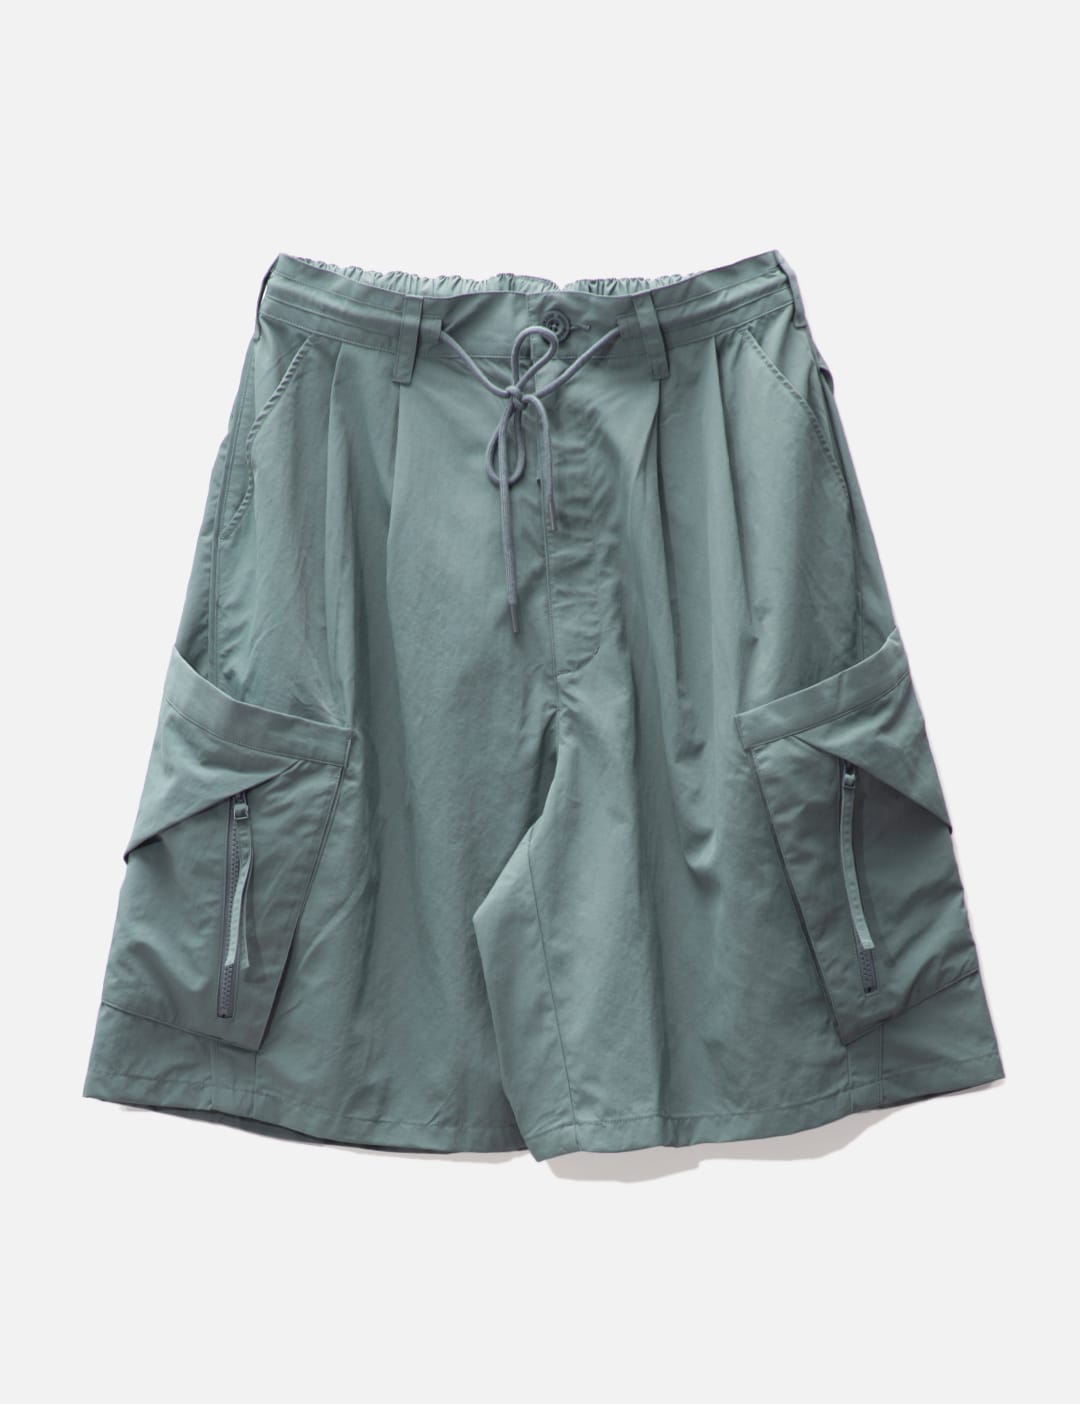 GOOPiMADE x WildThings D-String Utility Shorts